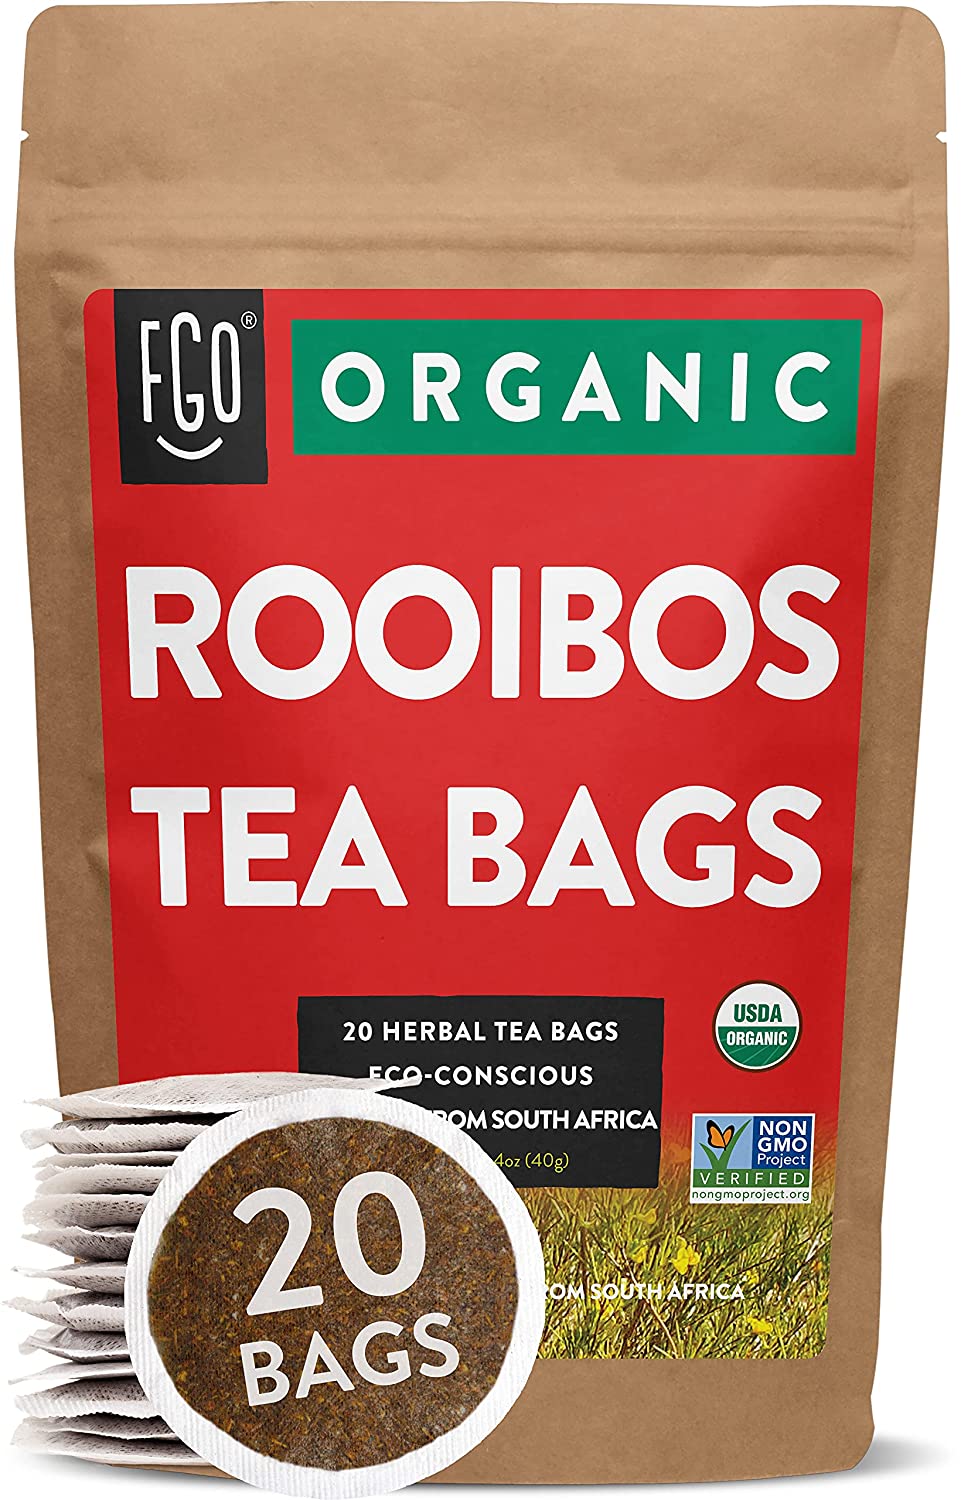 Style: Tea bags, Flavor Name: Rooibos, Size: 100 Count (Pack of 1)